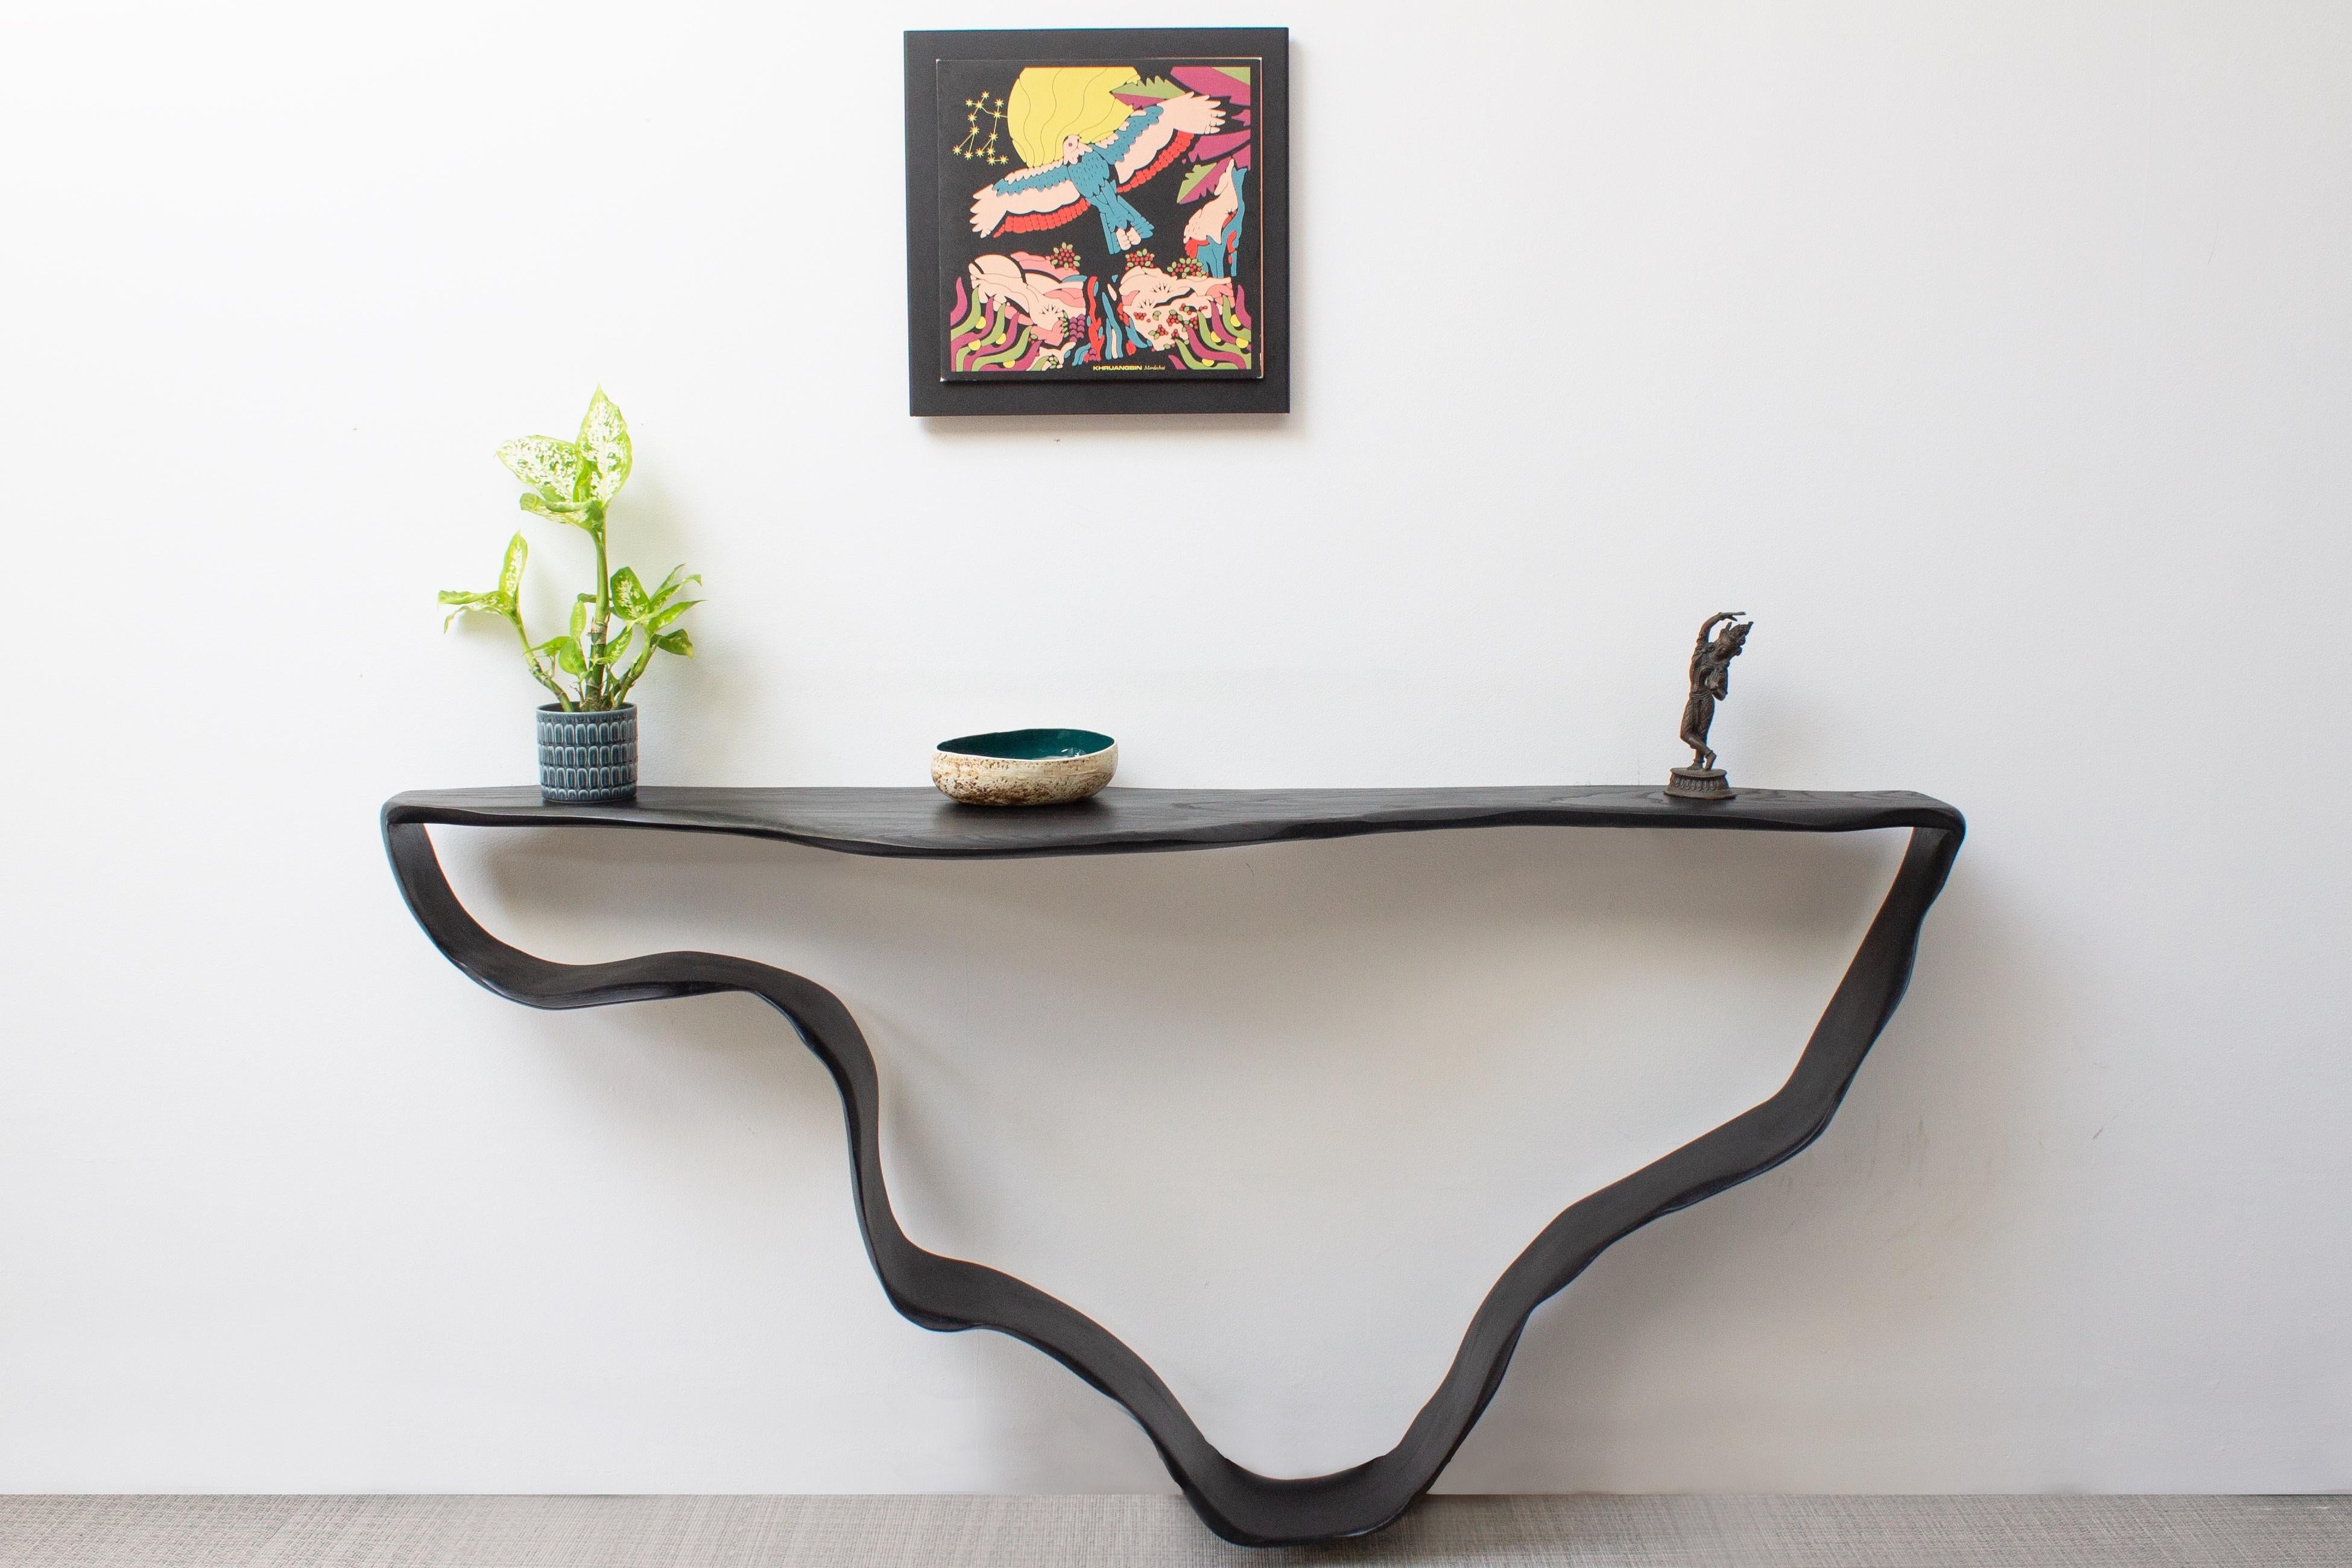 This sculptural console table evokes a sense of mystery and fluidity. There are various elements taken from eroded driftwood and the fluid sleek movements of a ribbon.

This has been designed in such a way that we think that the entire piece is one